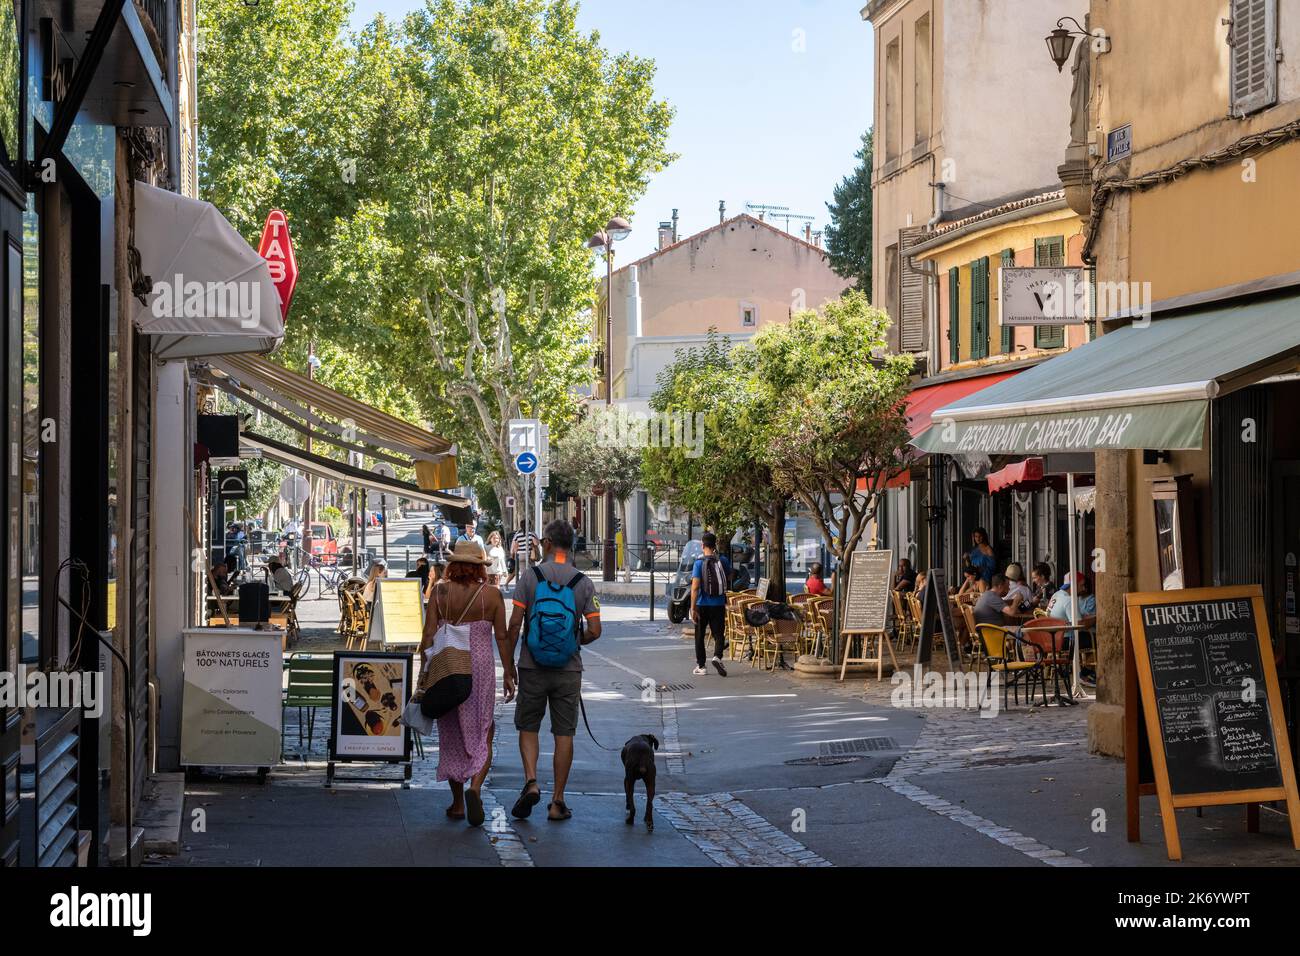 Shoppers in the old city center of Aix-en-Provence in southern France. Stock Photo